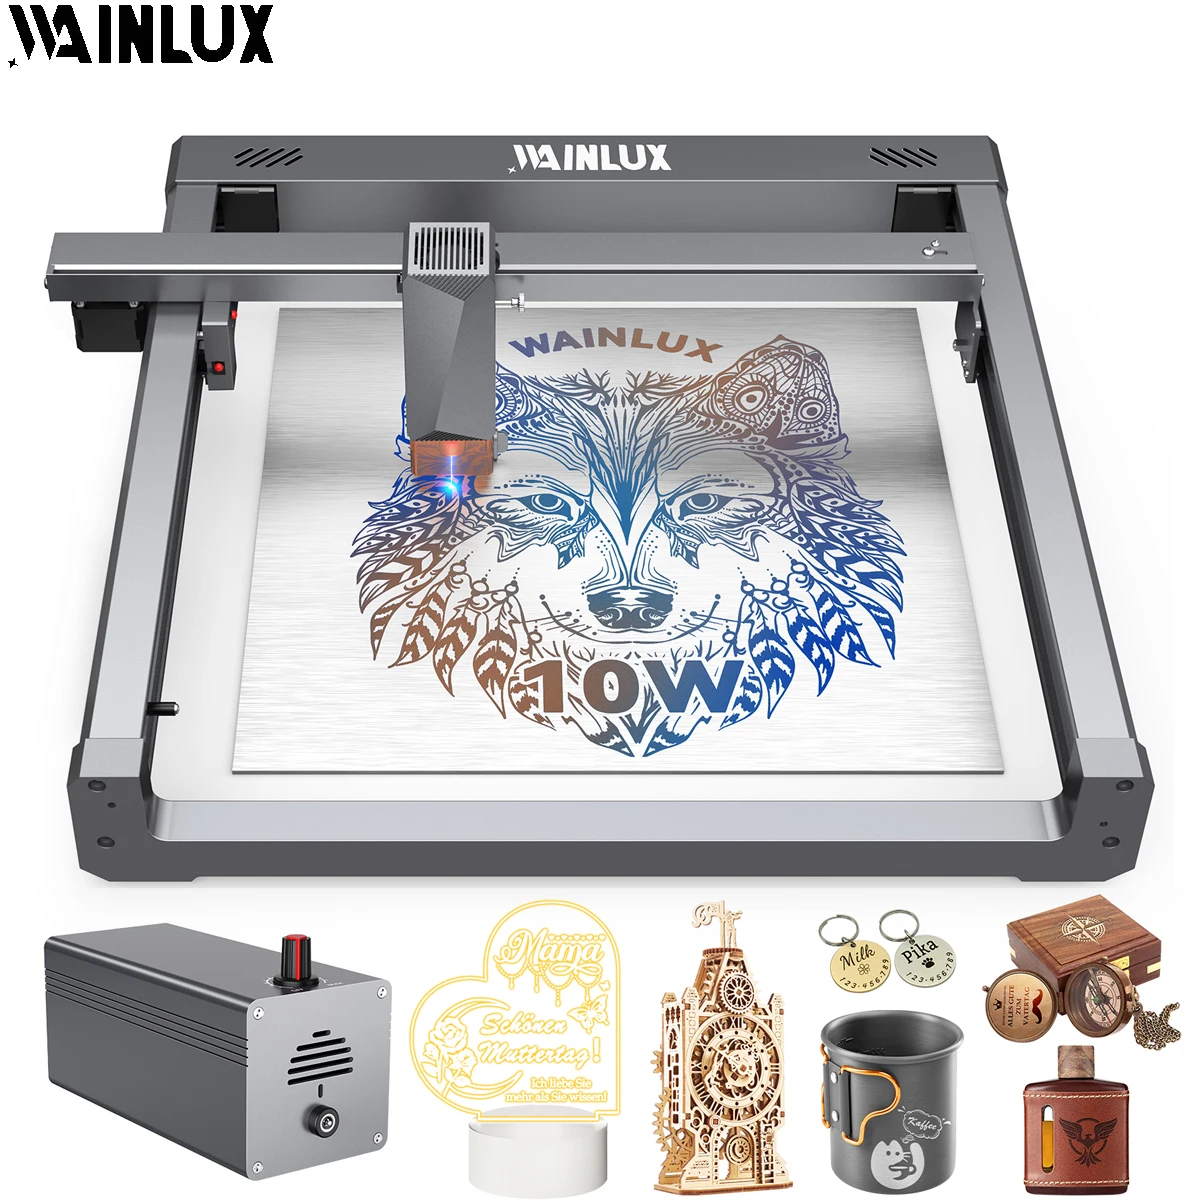 

WAINLUX L6 Laser Engraver Cutter Woodworking 80W Powerful CNC Laser Engraving Machine DIY Tools For Metal/Fabric/Acrylic 320*350